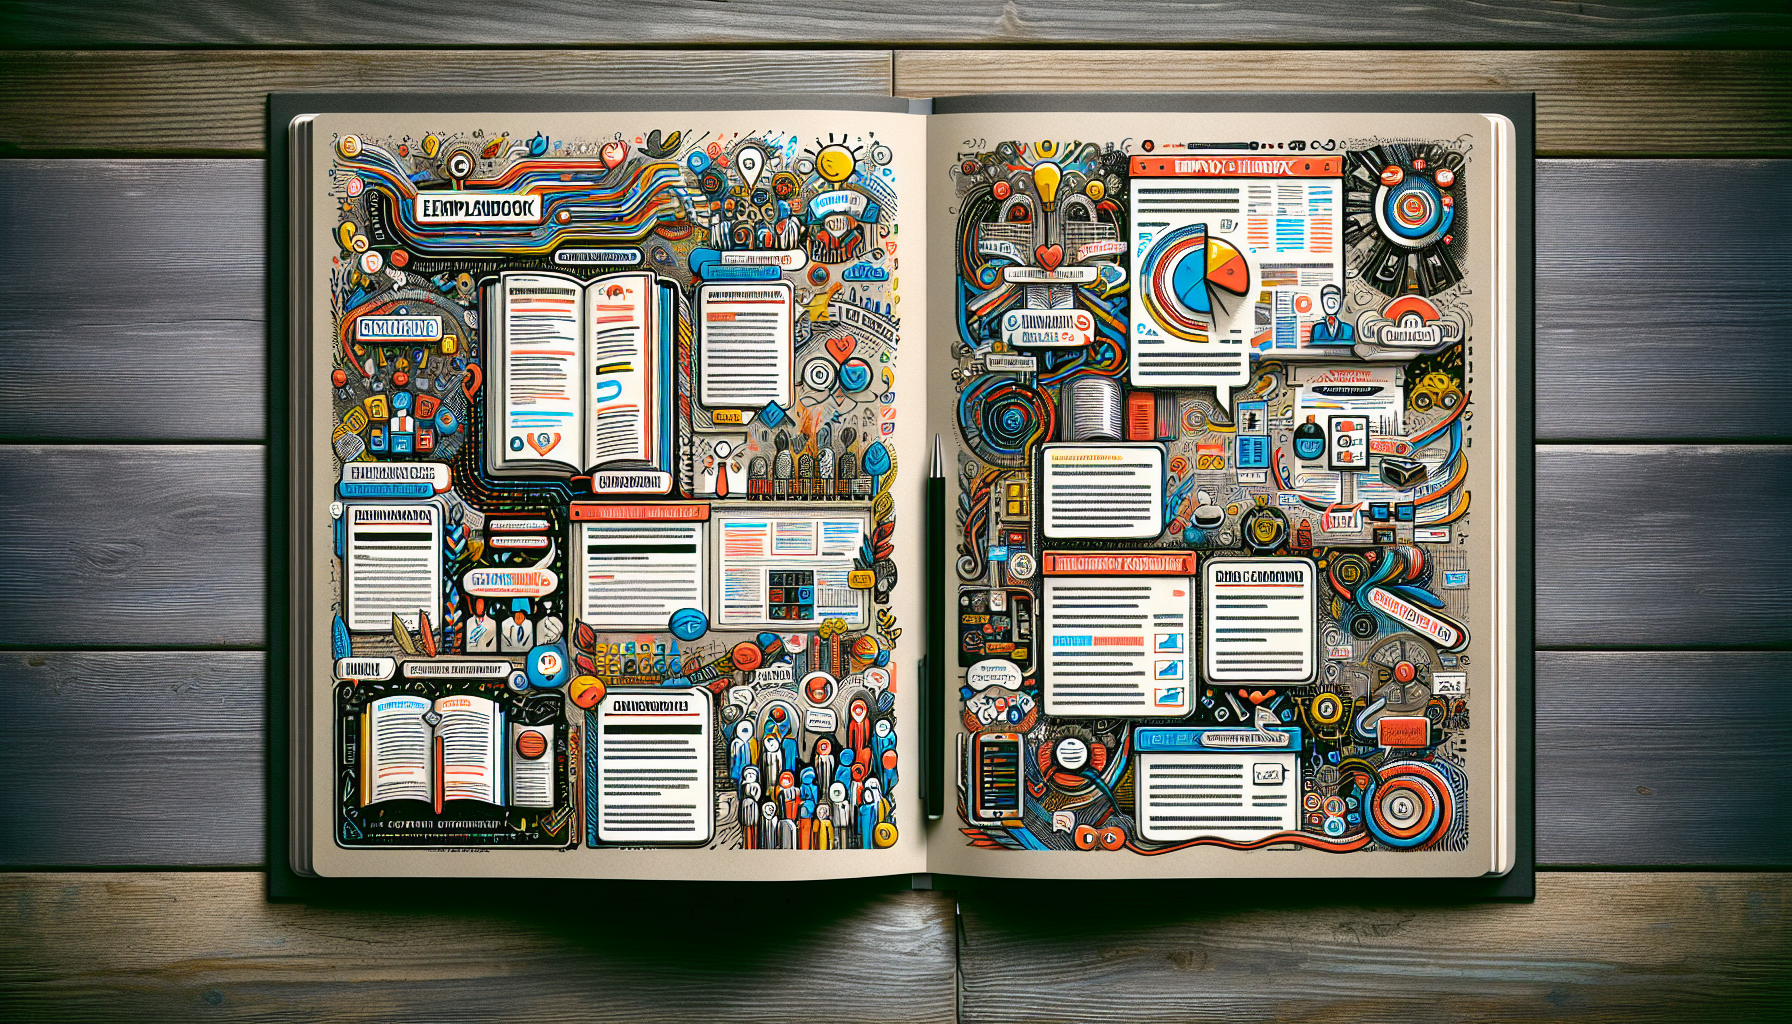 Employee handbook with engaging visuals and clear language